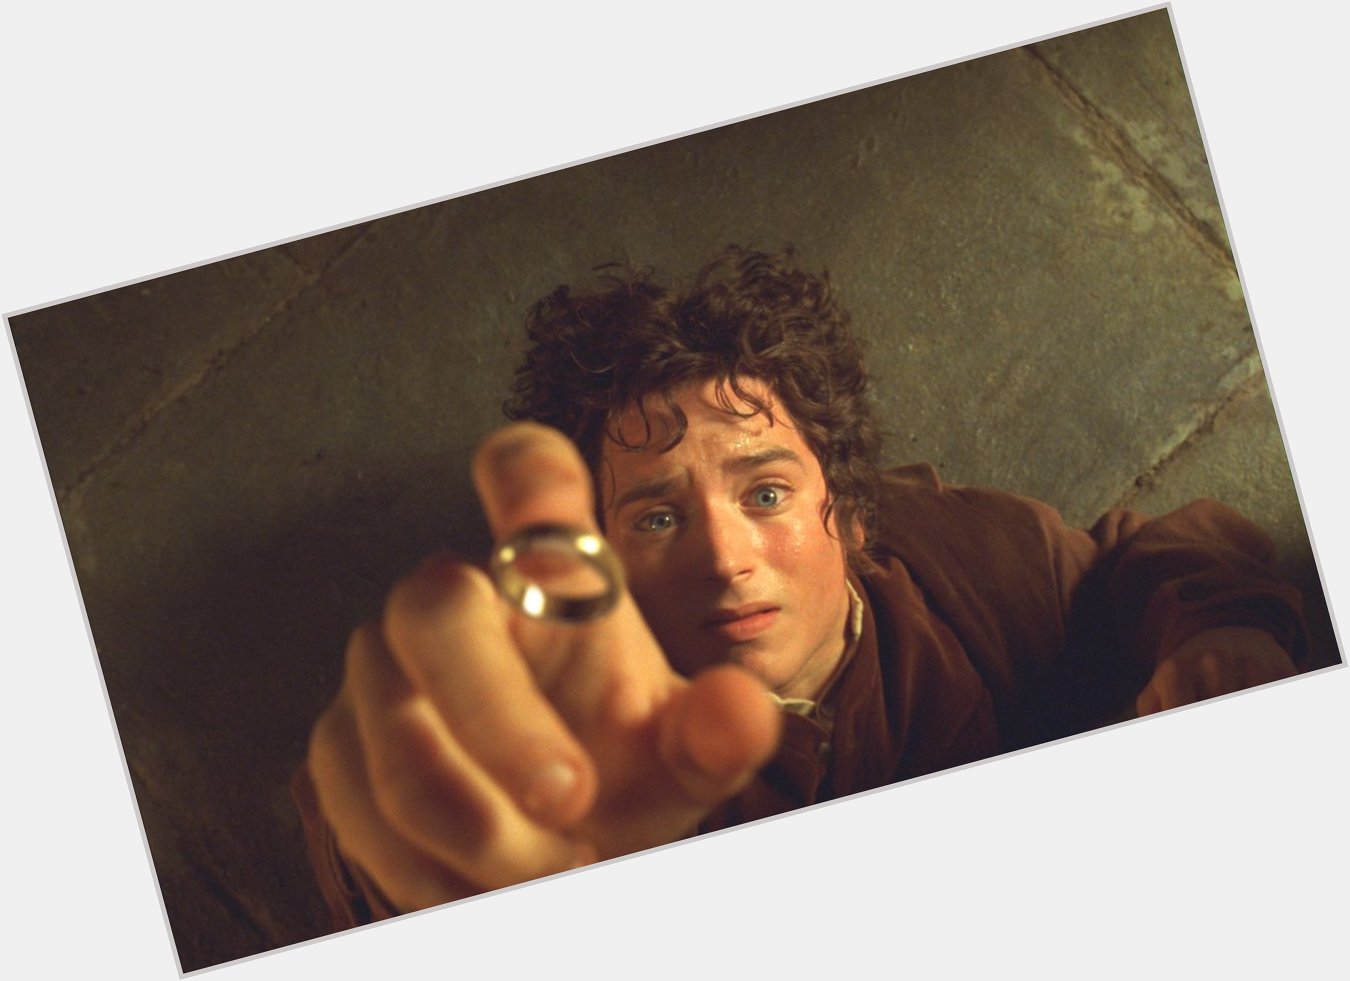 Happy birthday to our ring-bearer, Elijah Wood! 